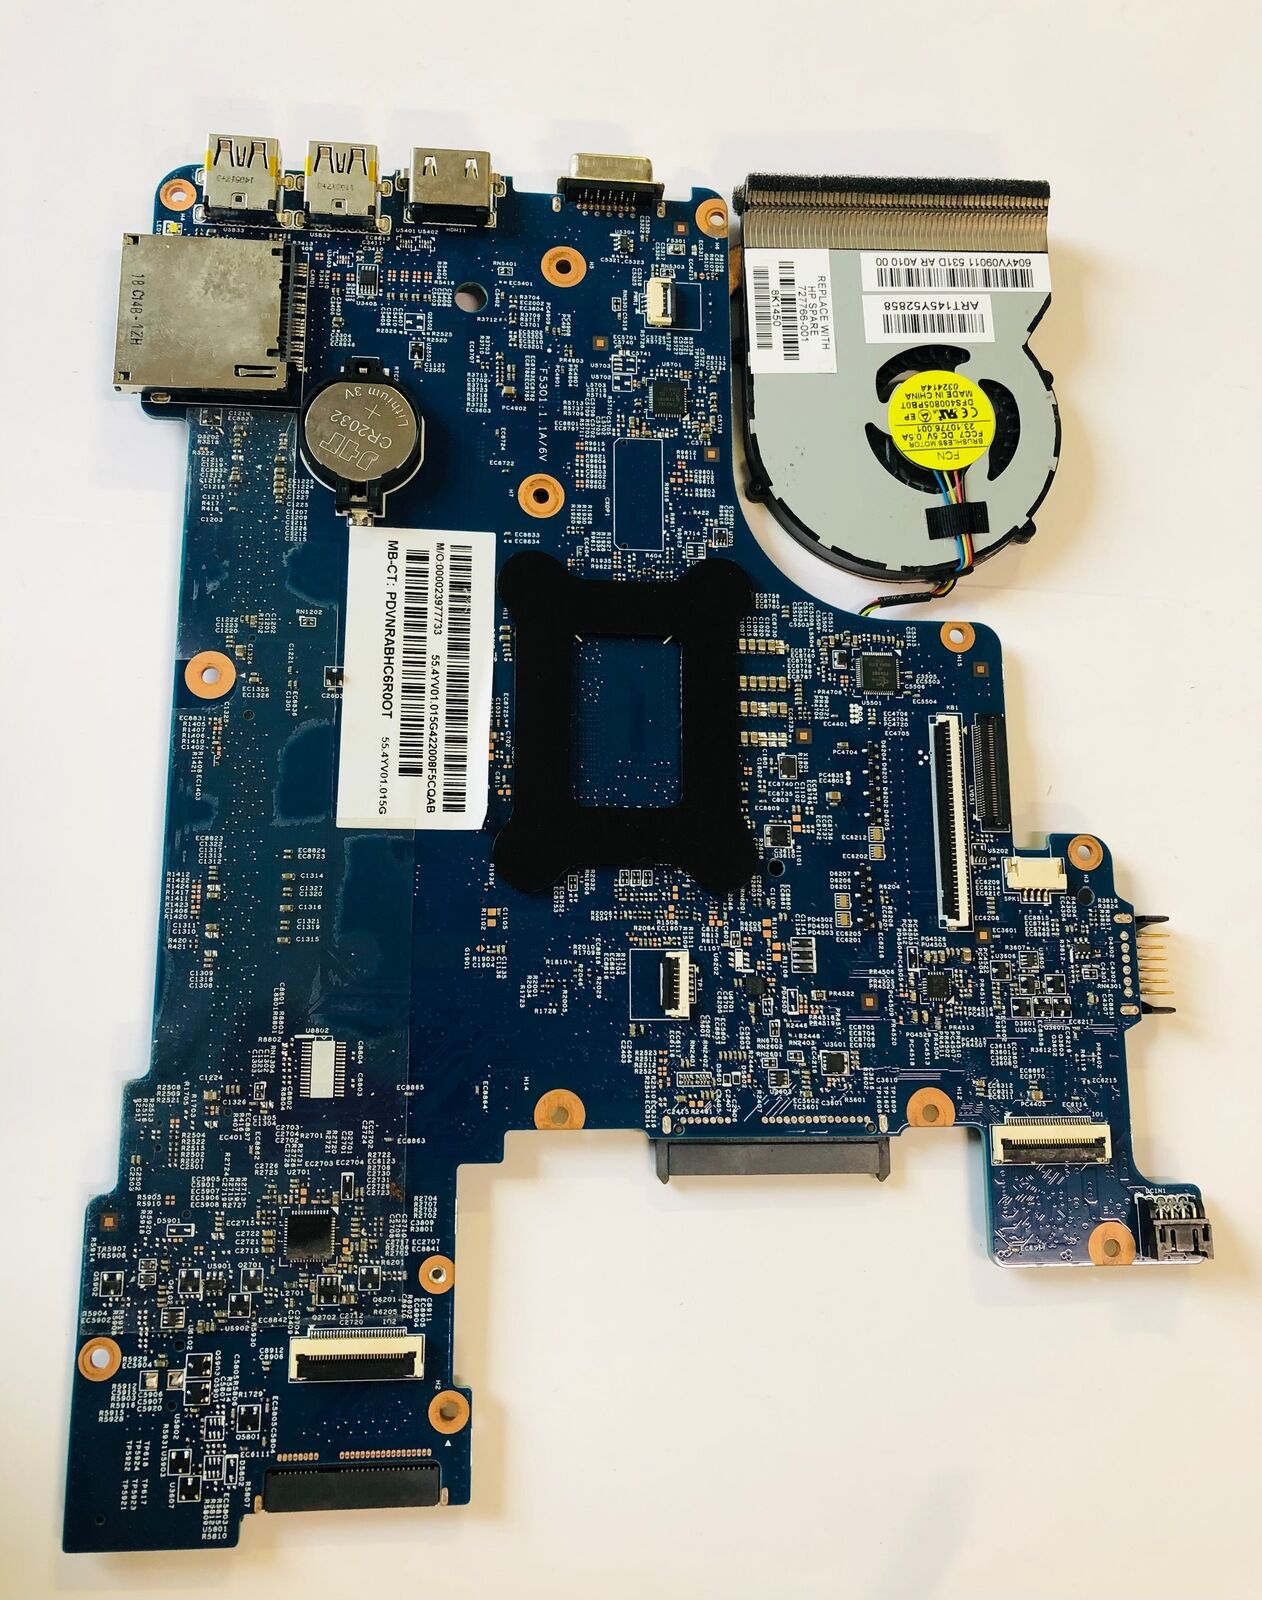 Mainboard Racer MB 12239-1N for HP Probook 430-G1